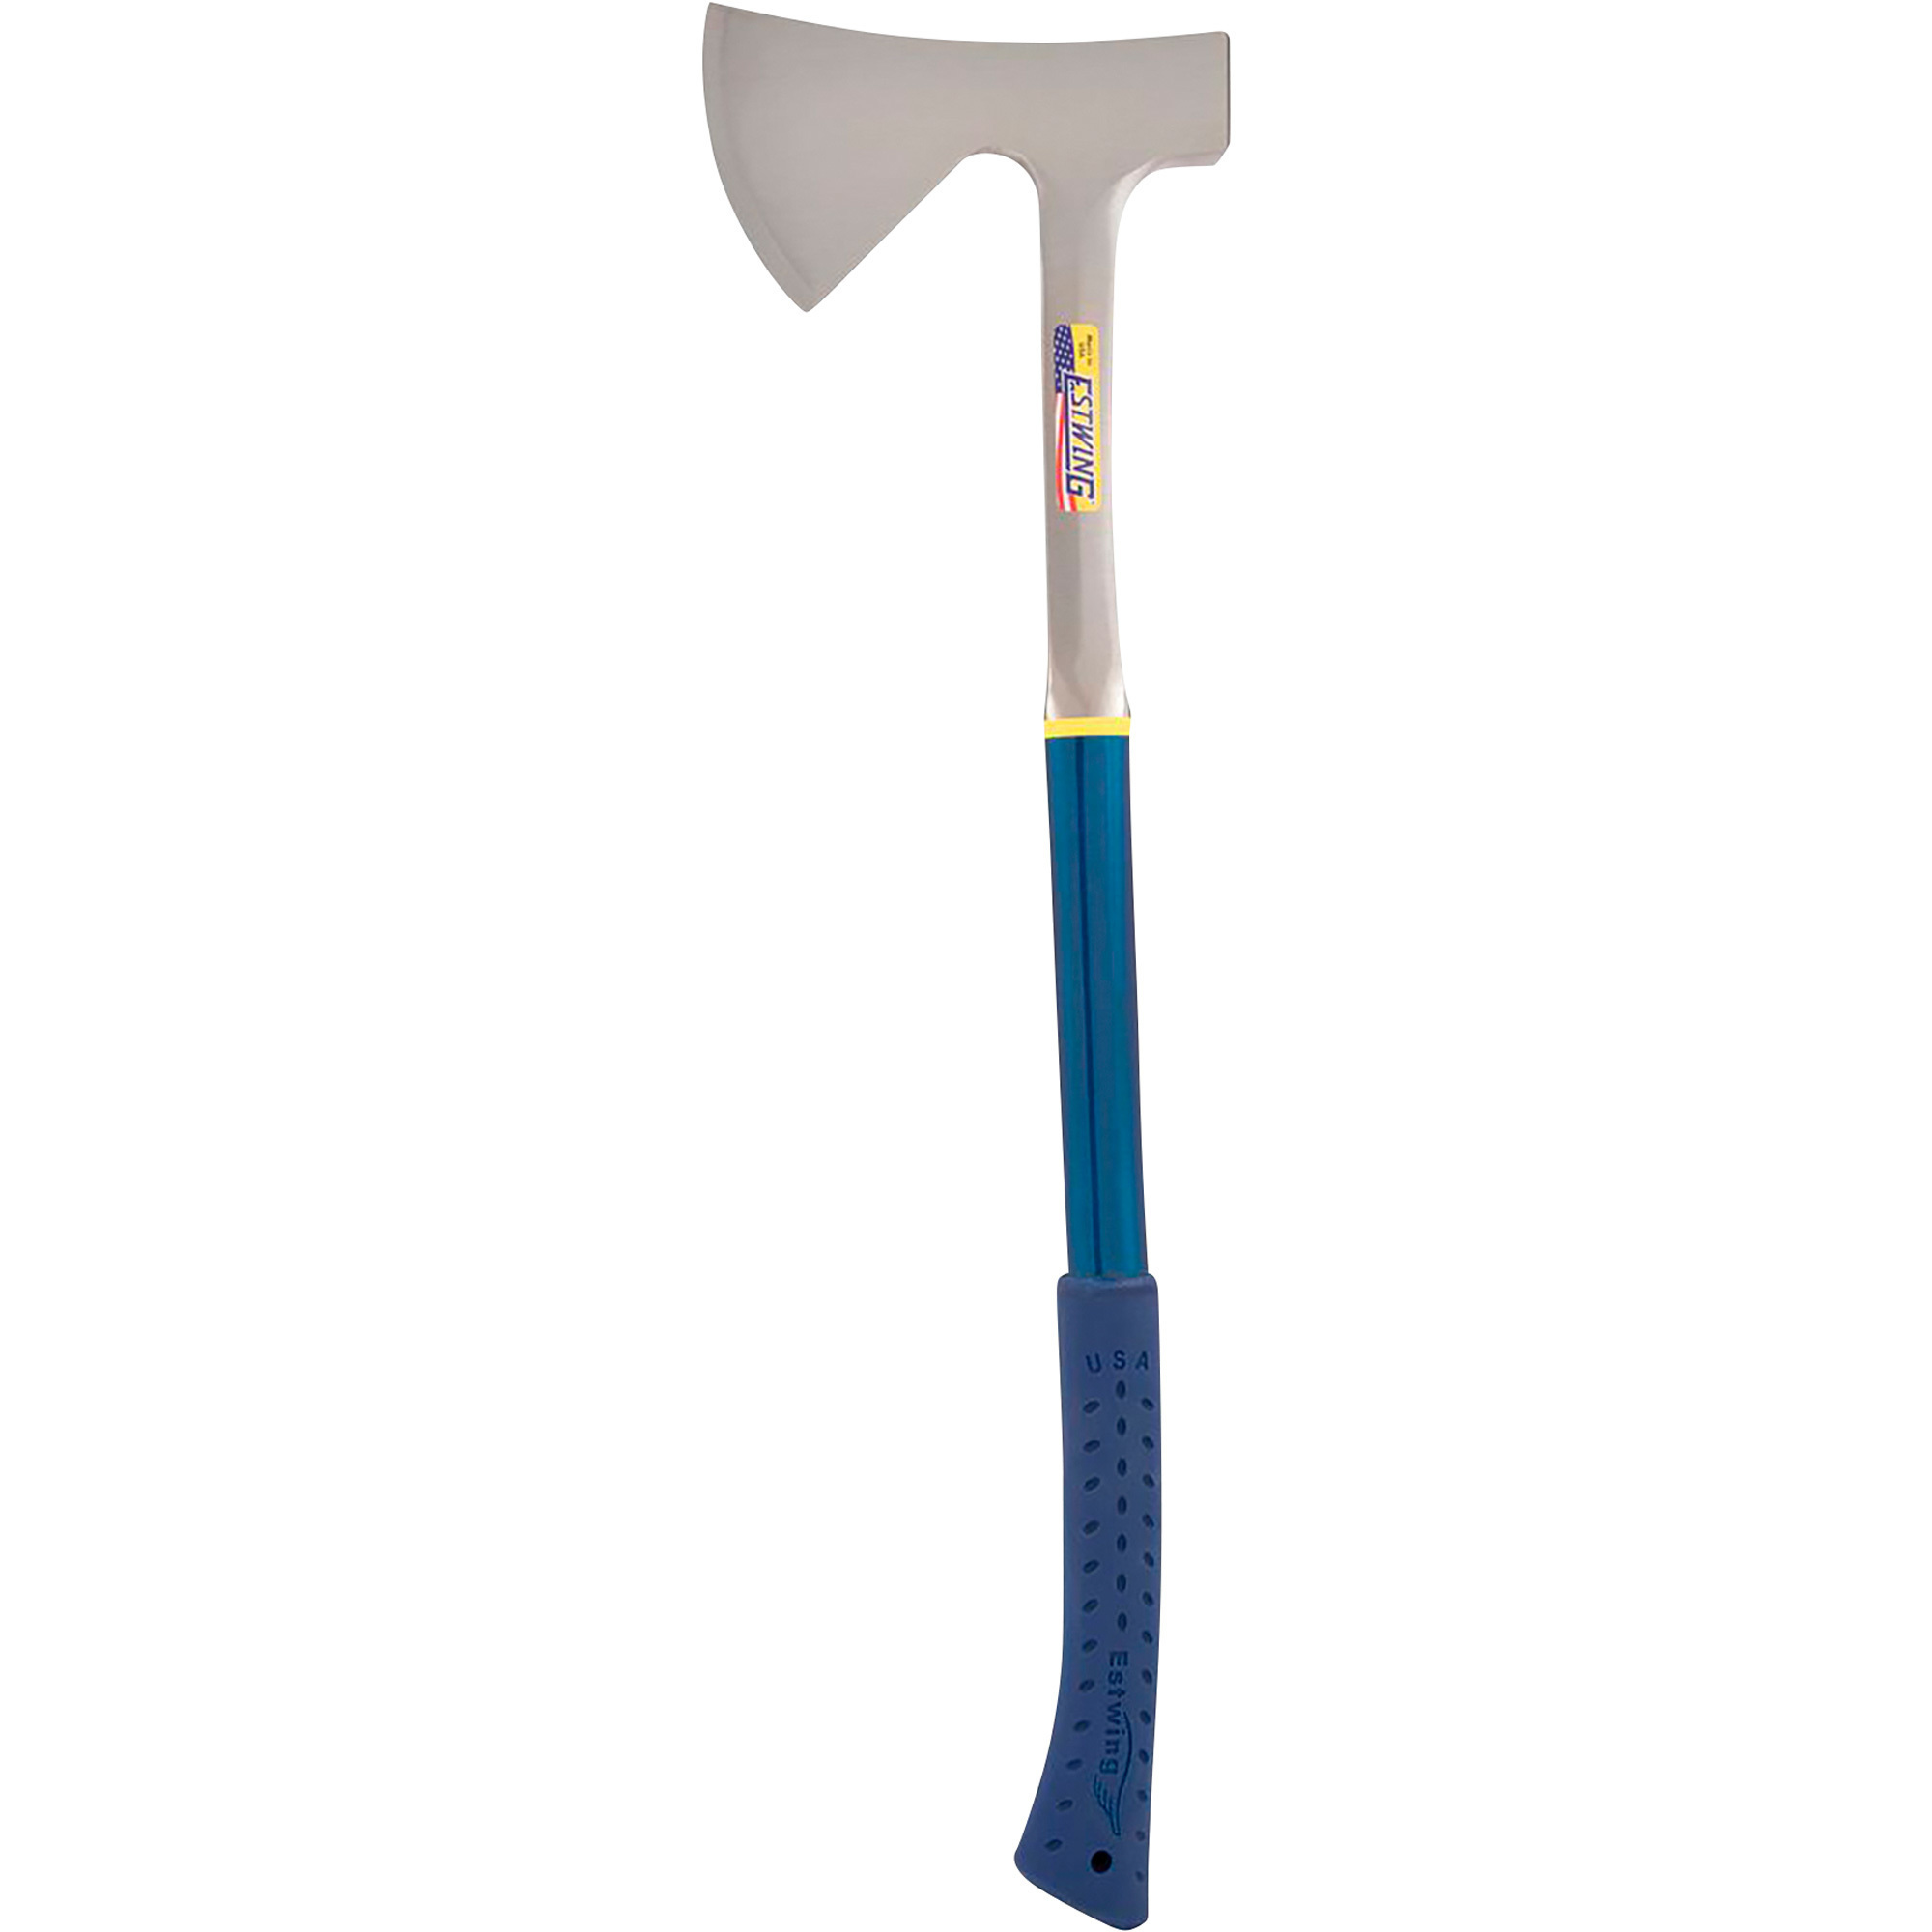 Estwing 26Inch Camper's Axe â Vinyl Grip, Model E45A